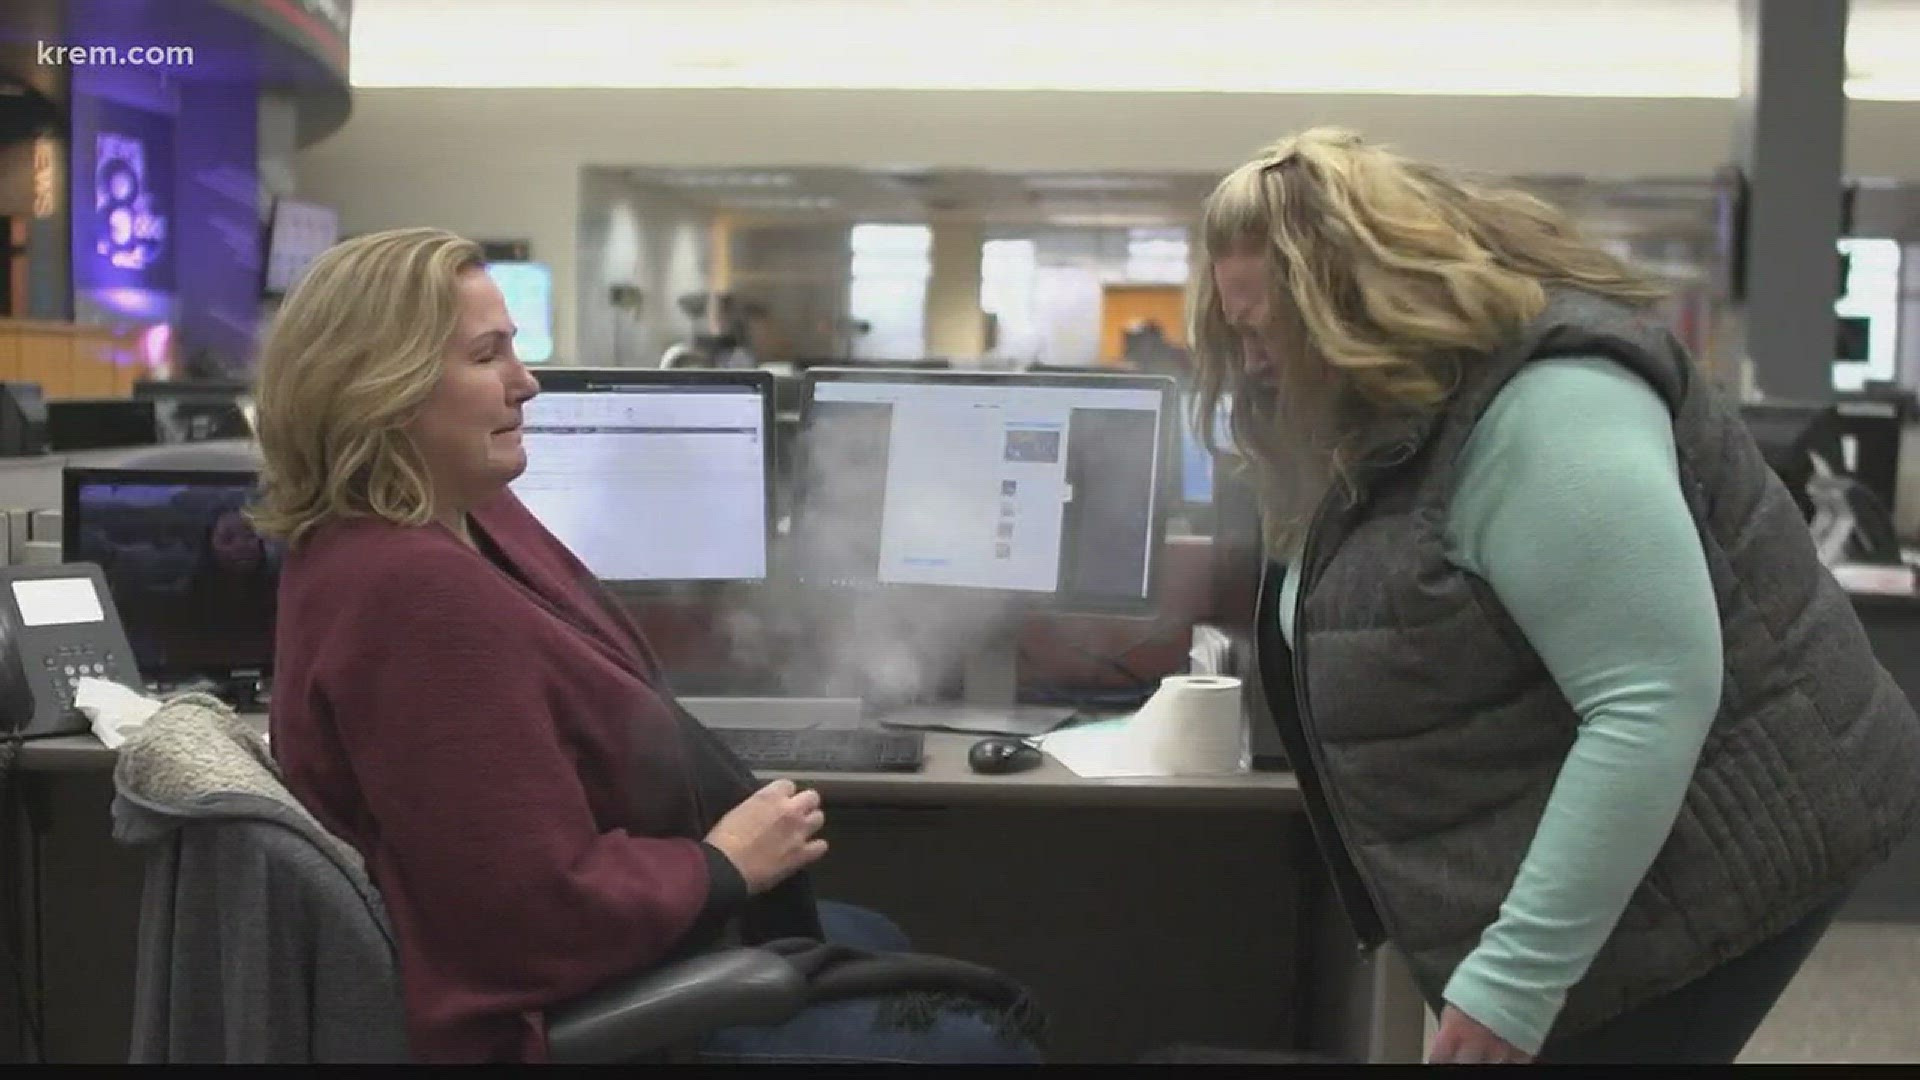 The B.M.J. says a recent case found the force of a man's inward sneeze punctured his esophagus. KREM 2's Rose Beltz found out more on those healthy sneezing habits.